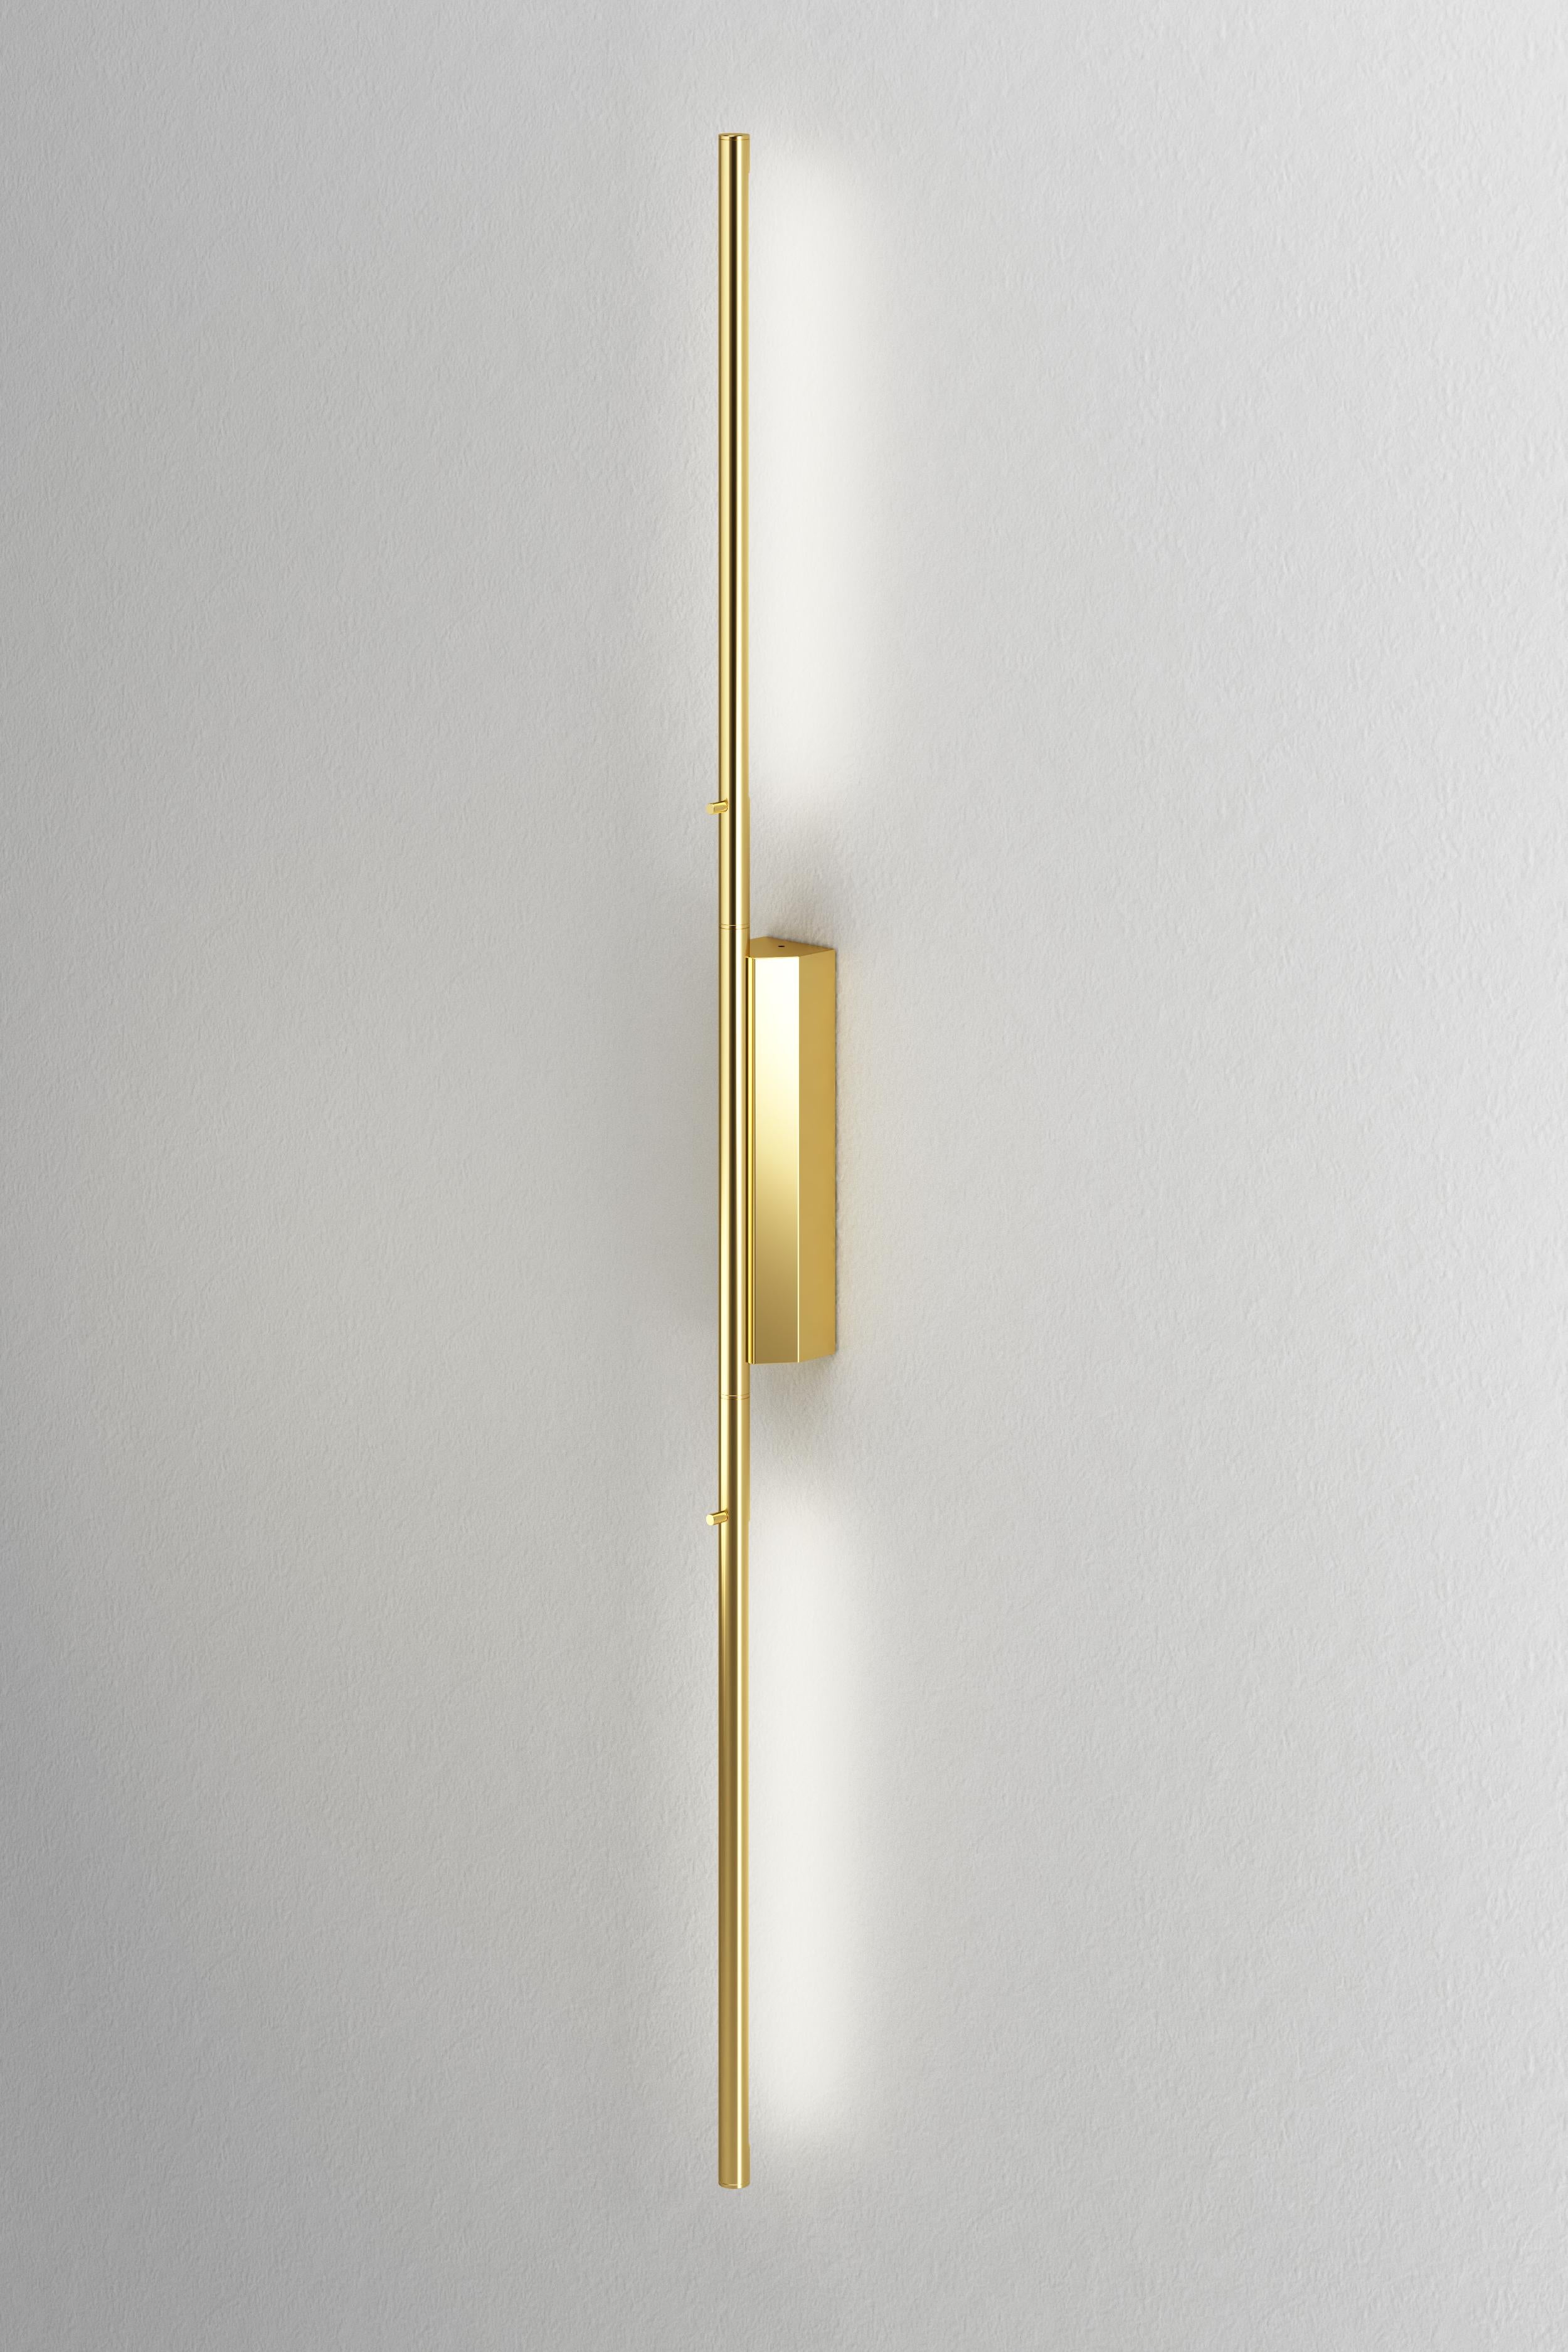 IP link double 1300 polished brass wall light by Emilie Cathelineau
Dimensions: D 4.5 x W 5 x H 1300 cm
Materials: Solid brass, polished brass, LED, polycarbonate.
Others finishes and dimensions are available.

All our lamps can be wired